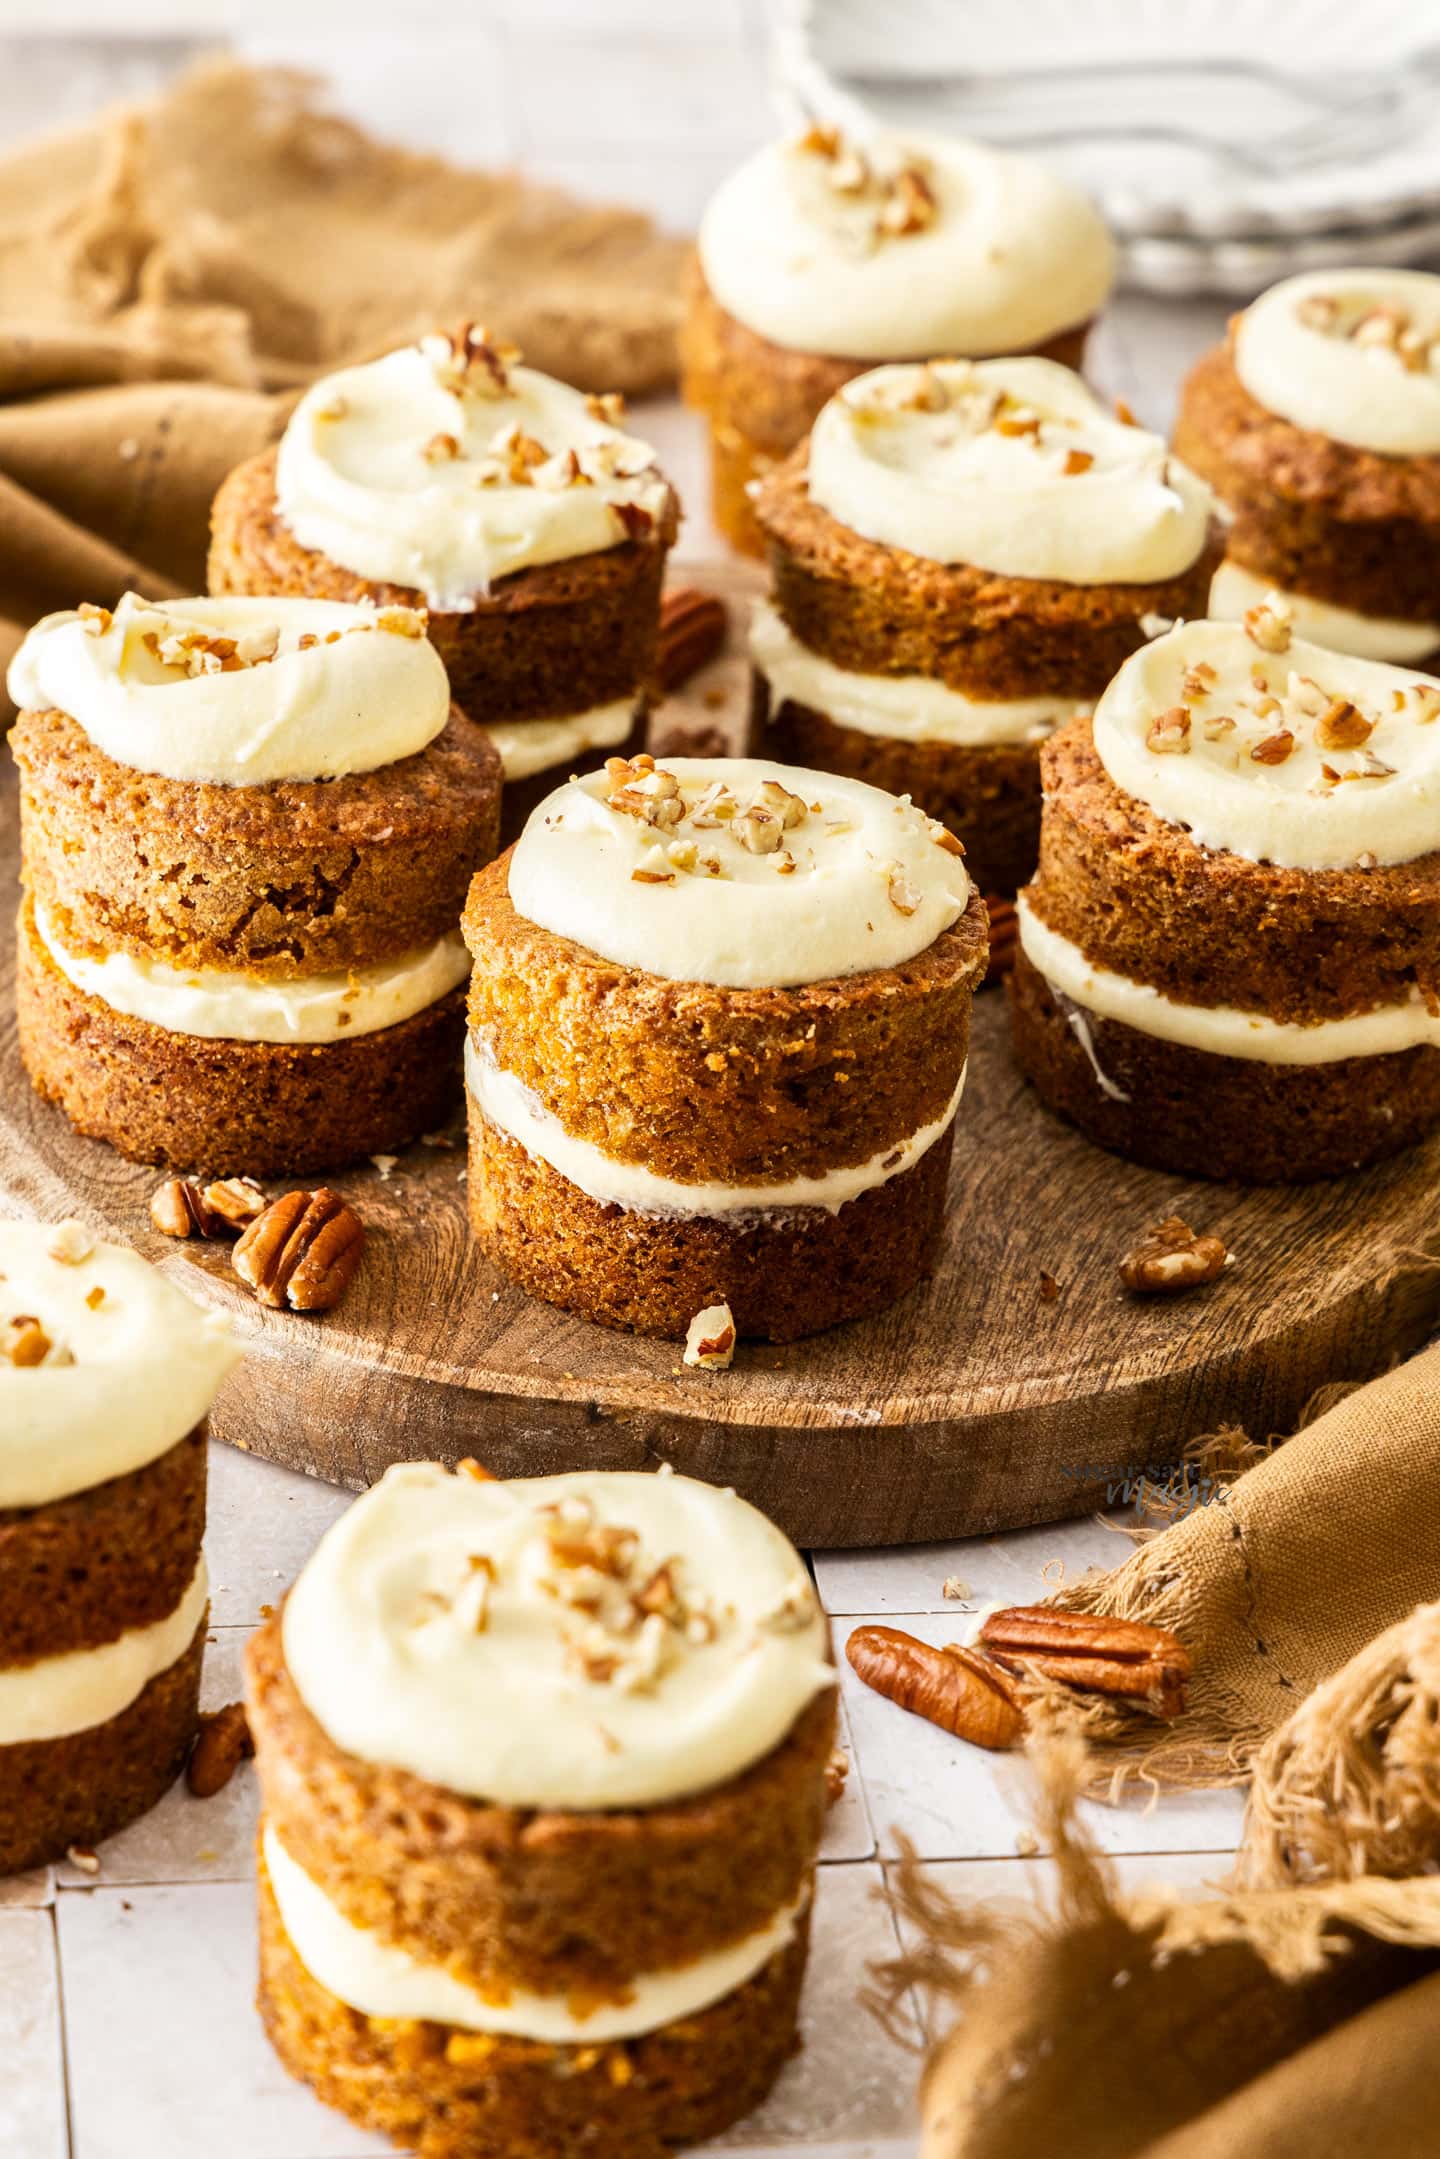 A batch of 9 mini carrot cakes on a wooden platter.